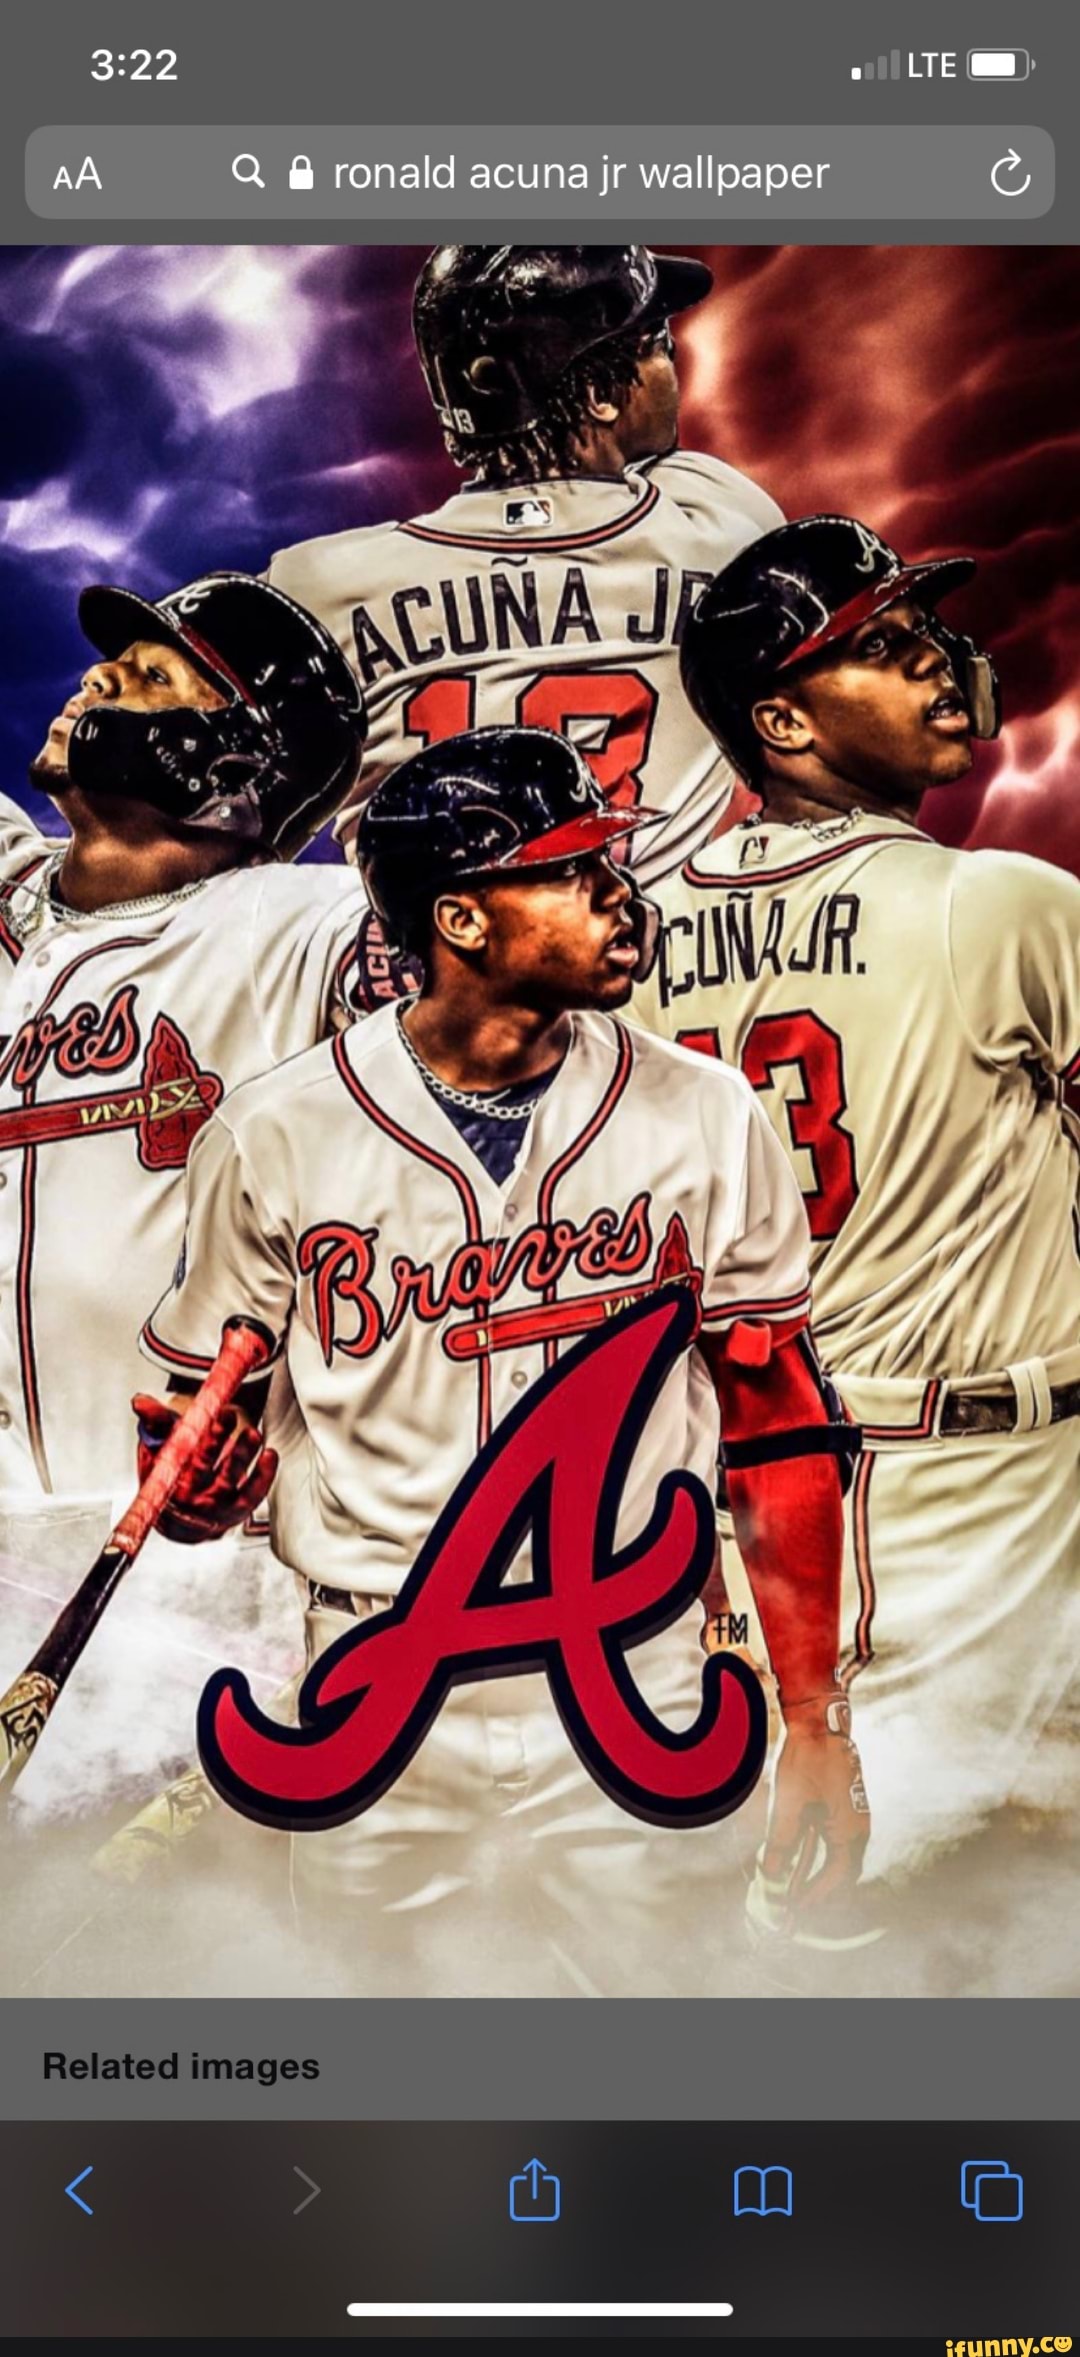 Enwallpaper  Ronald Acuna Jr Wallpaper Download  httpswwwenwallpapercomronaldacunajrwallpaper3 Ronald Acuna Jr  Wallpaper Free Full HD Download use for mobile and desktop Discover more  League Baseball National Outfielder Professionall 